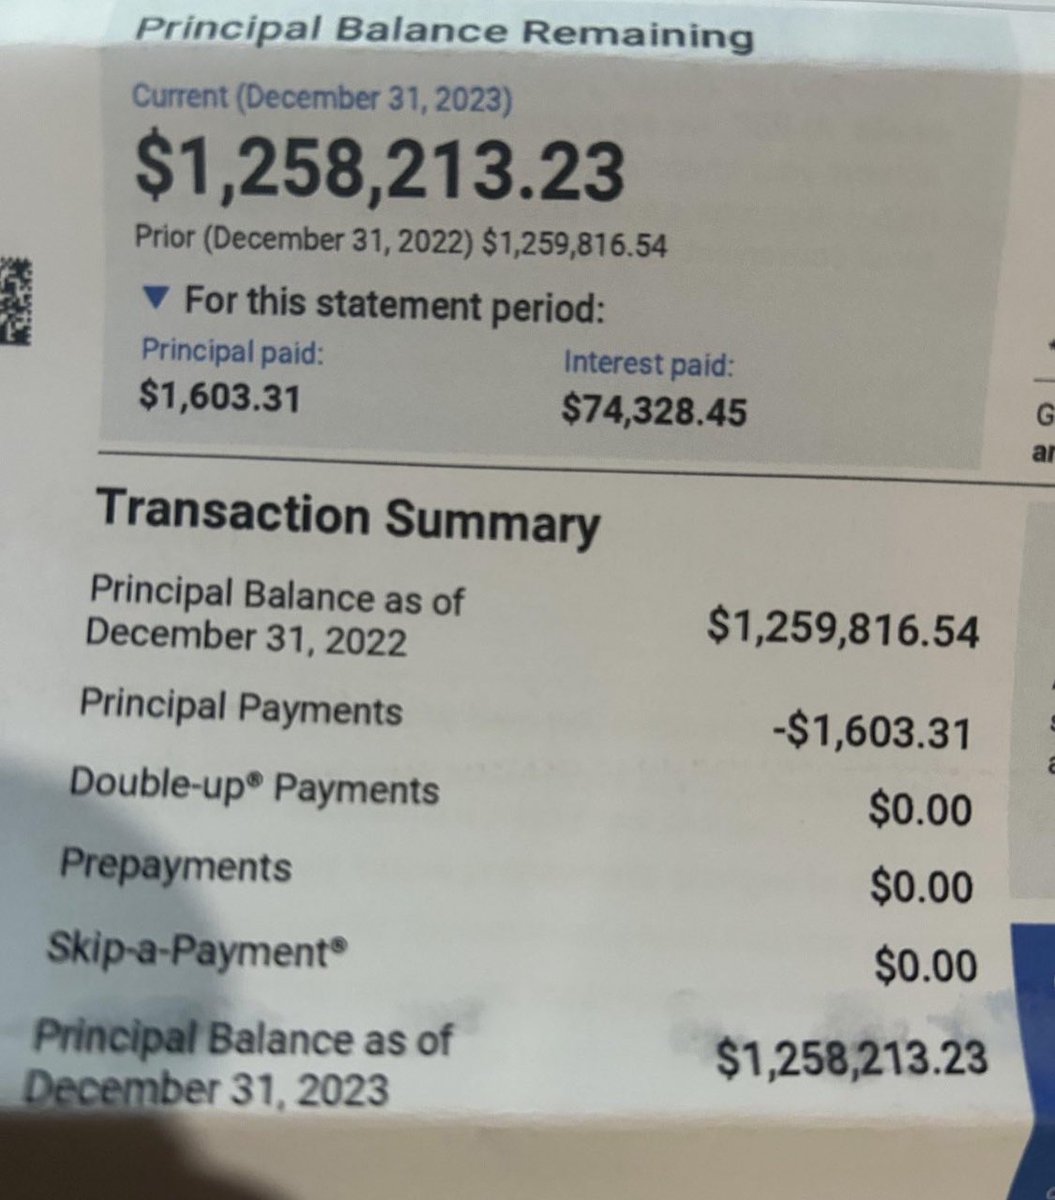 Someone’s 1 year of mortgage payments. $1603 principal paid. $74,328 interests paid 🏡 It’s a Canadian variable rate home loan after a mortgage extension (extended to 63 years). Basically renting your house and never really owning it.